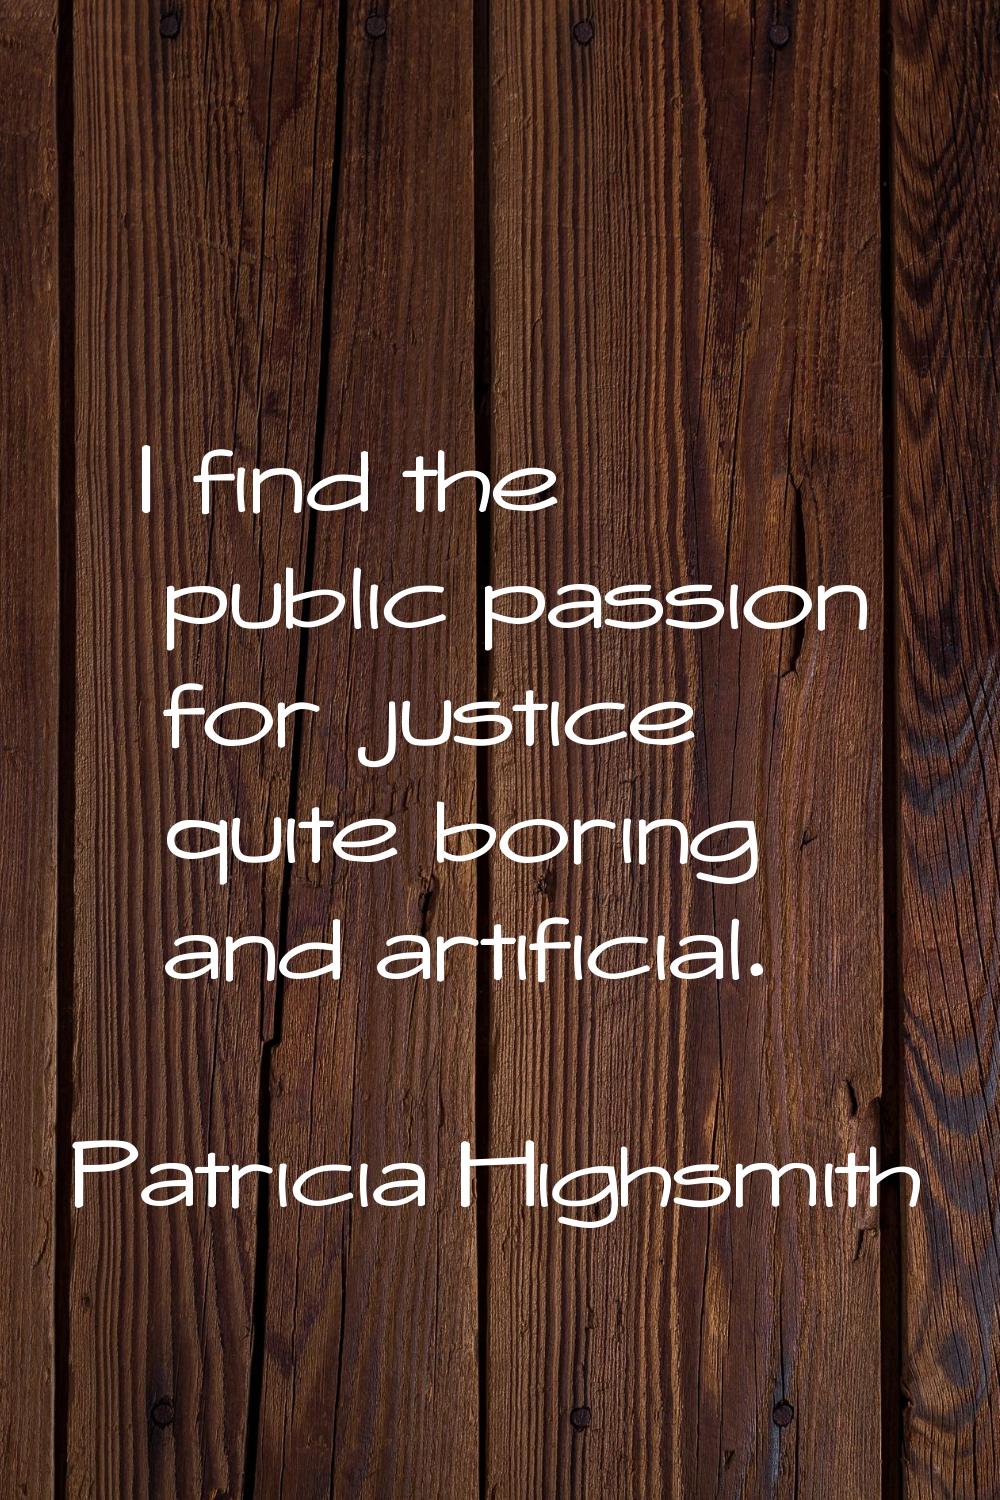 I find the public passion for justice quite boring and artificial.